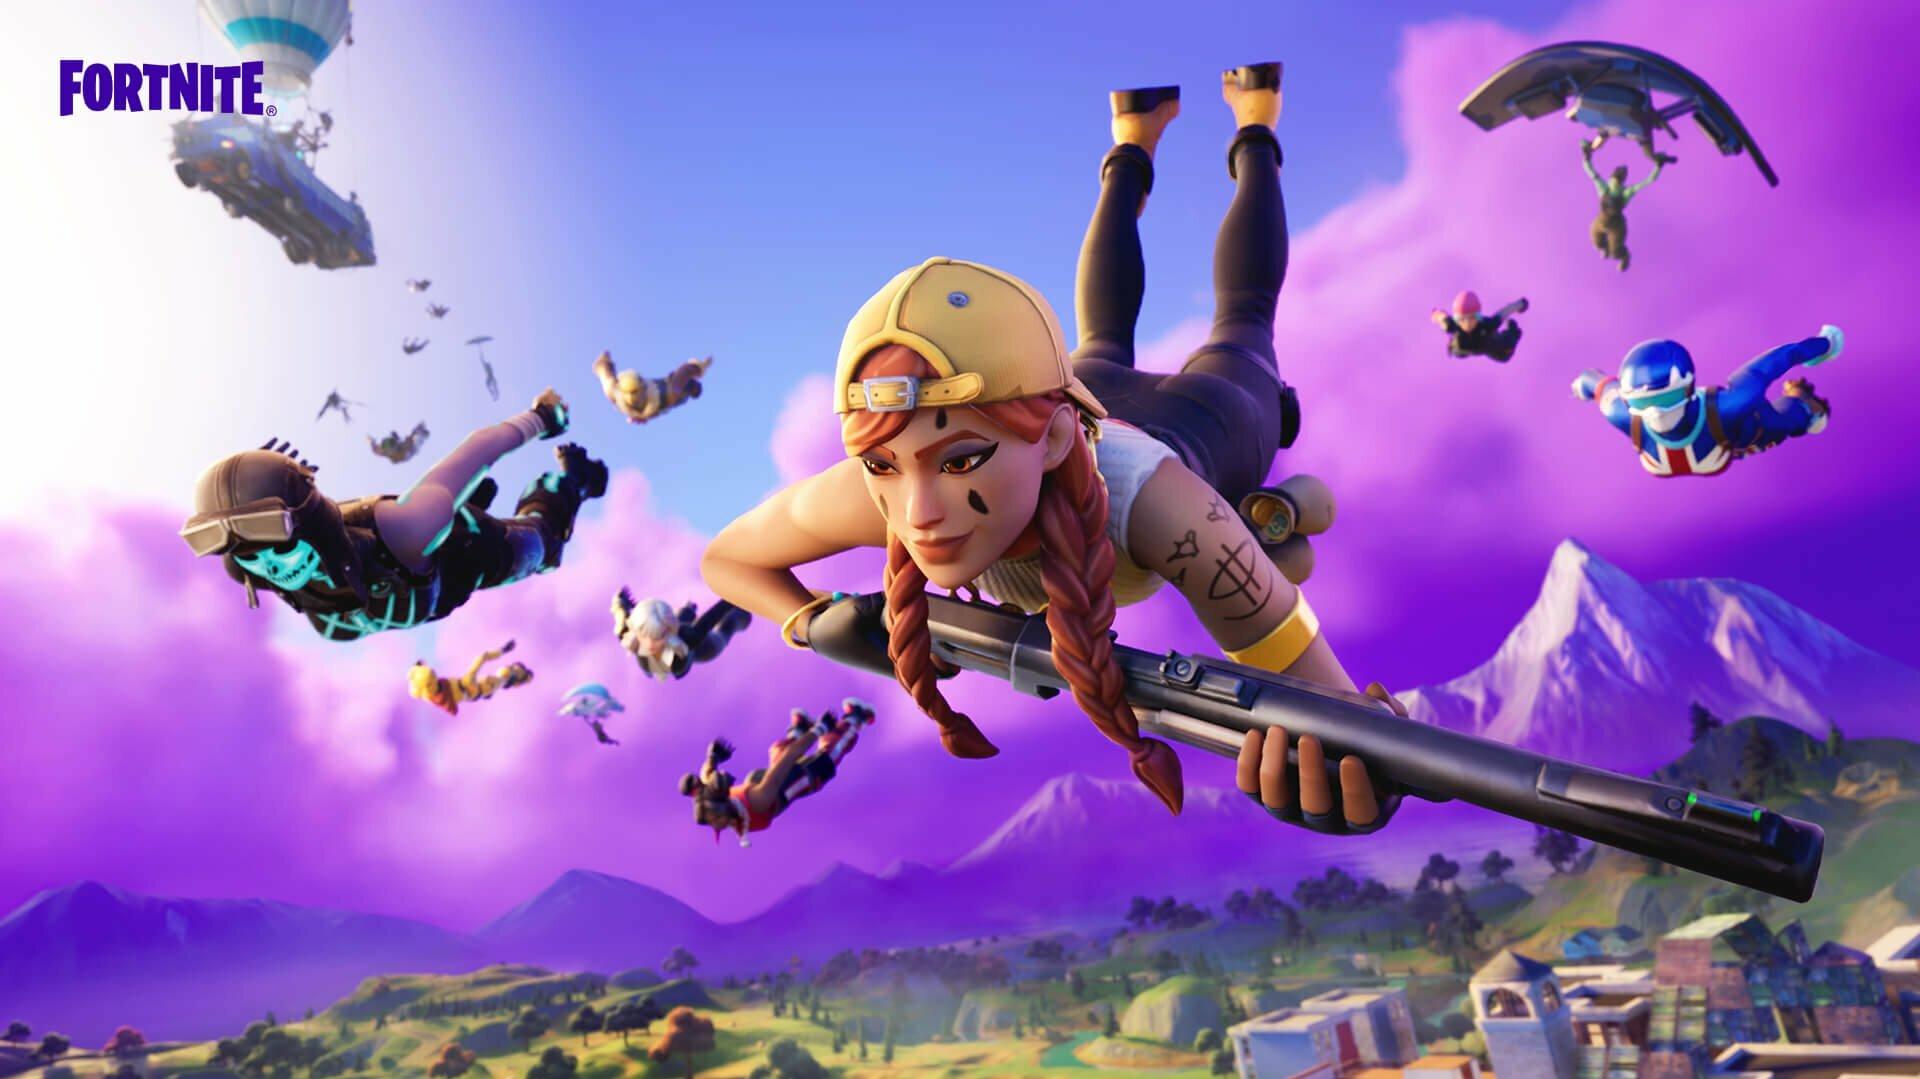 Fortnite Season Art Seems To Hint At Return Of Tilted Towers